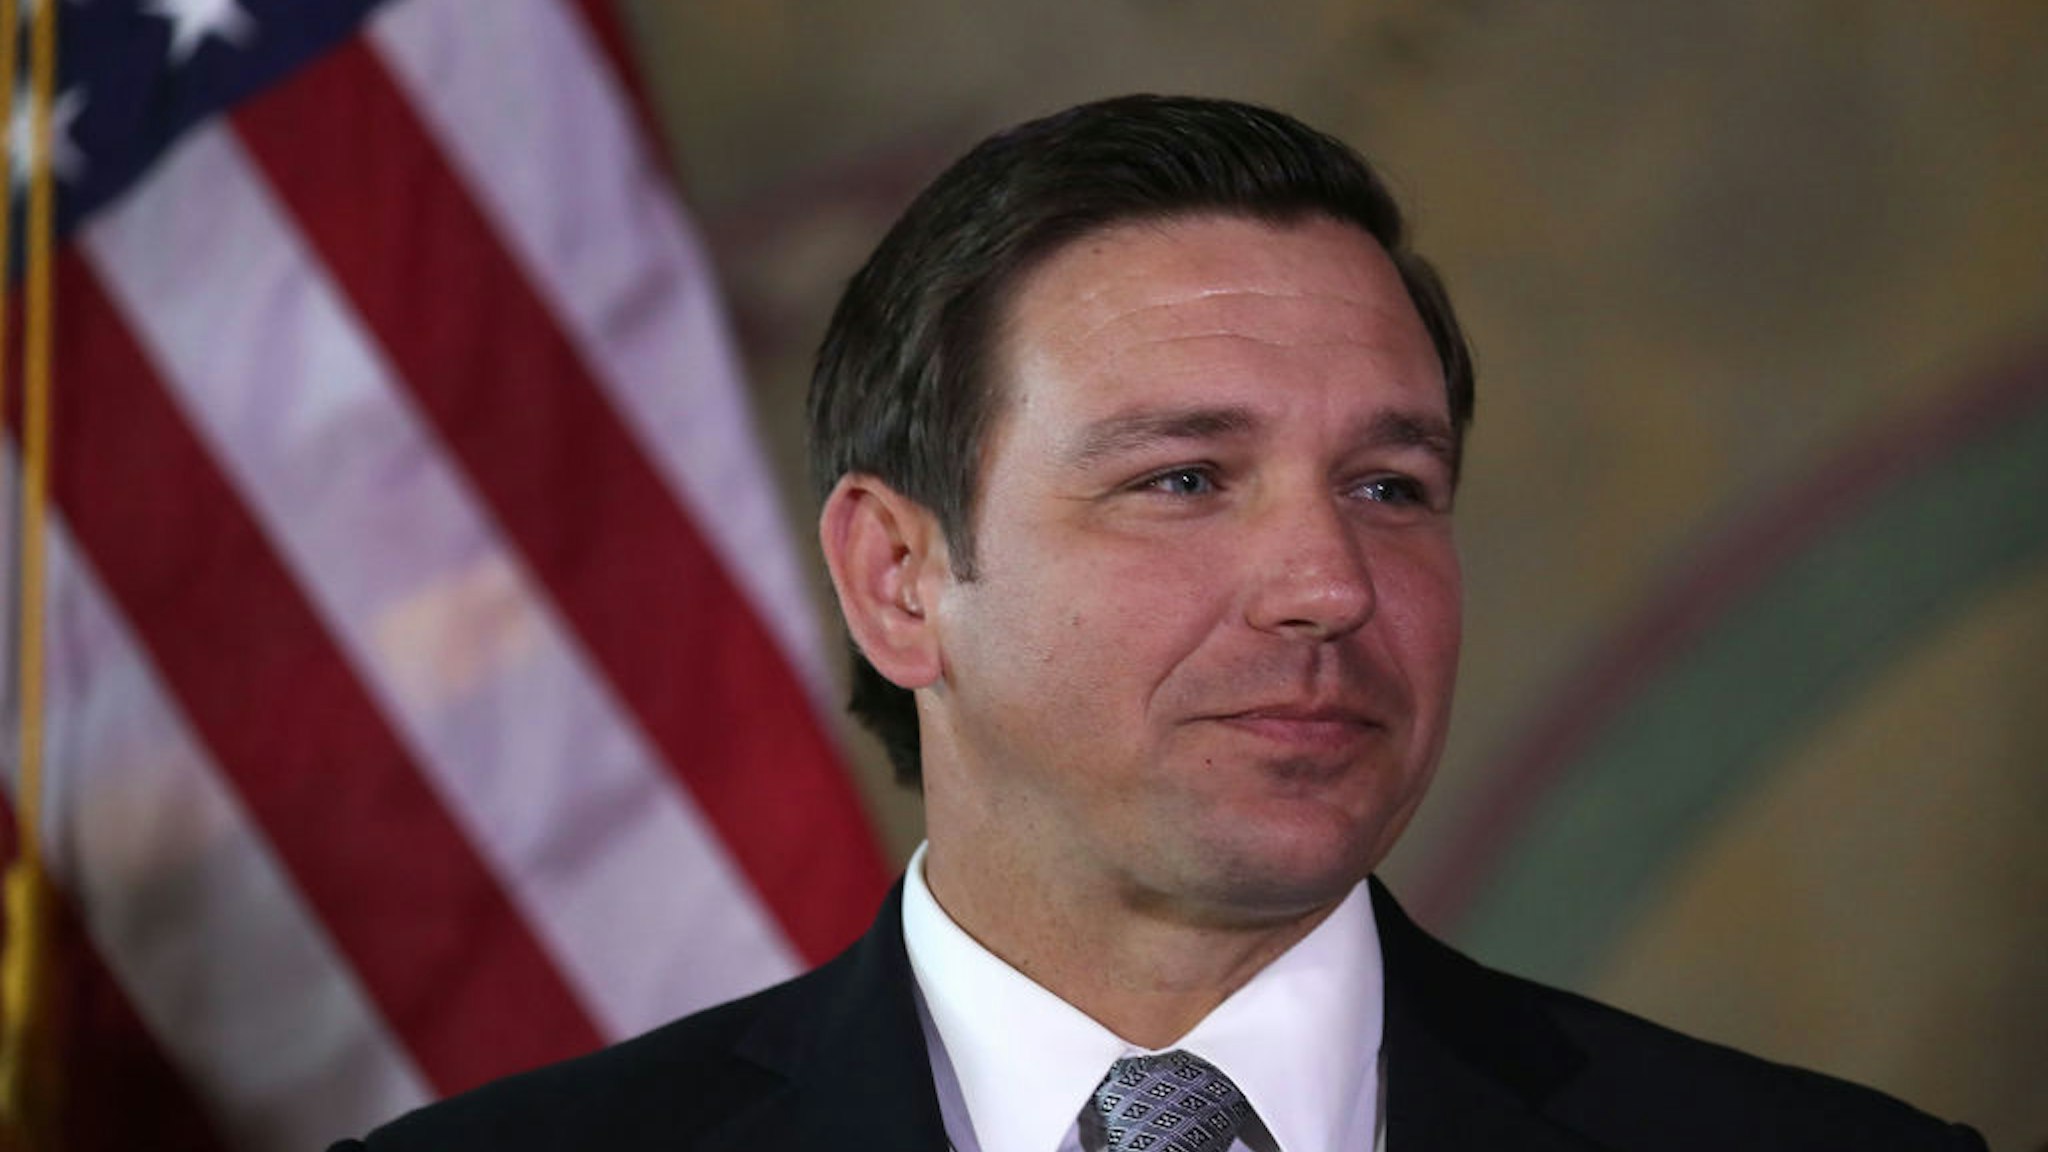 Ron DeSantis attends an event at the Freedom Tower where he named Barbara Lagoa to the Florida Supreme Court on January 09, 2019 in Miami, Florida.